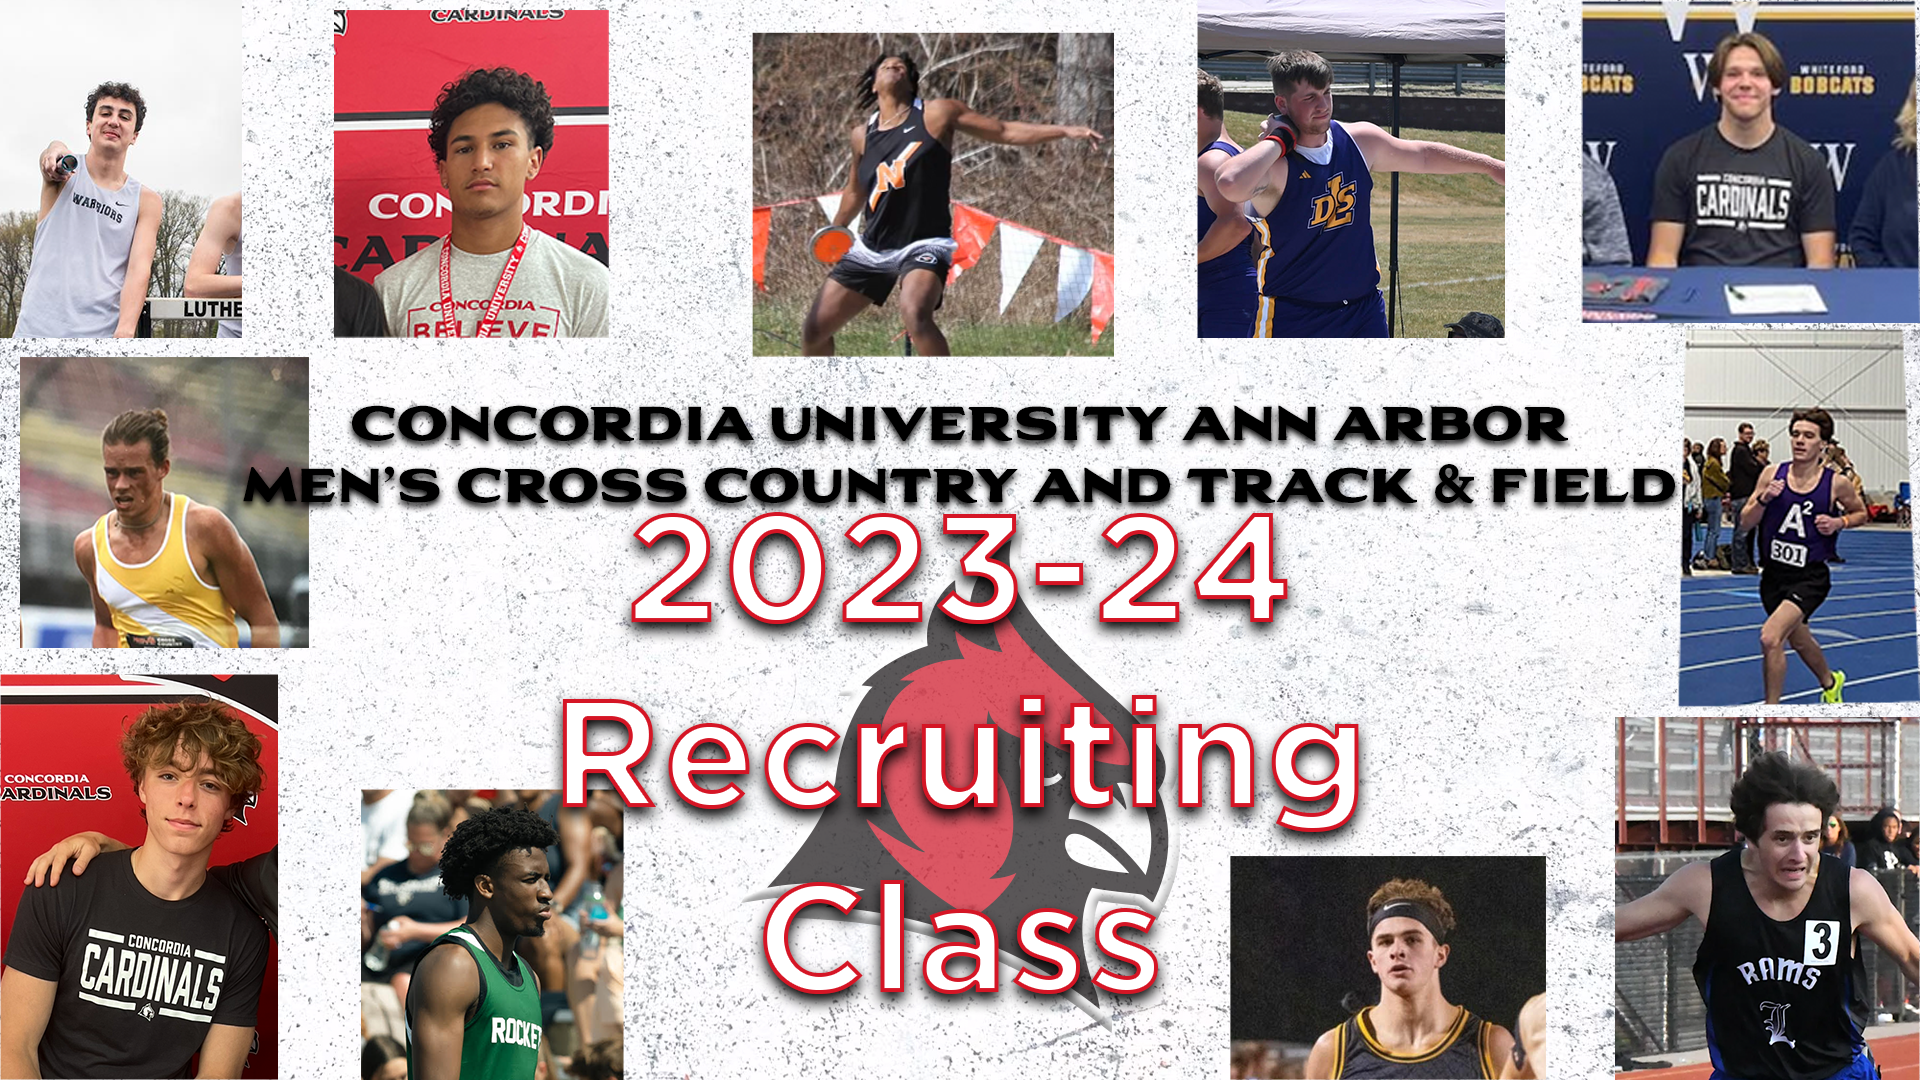 Men's Cross Country and Track &amp; Field announce the 2023-24 Recruiting Class